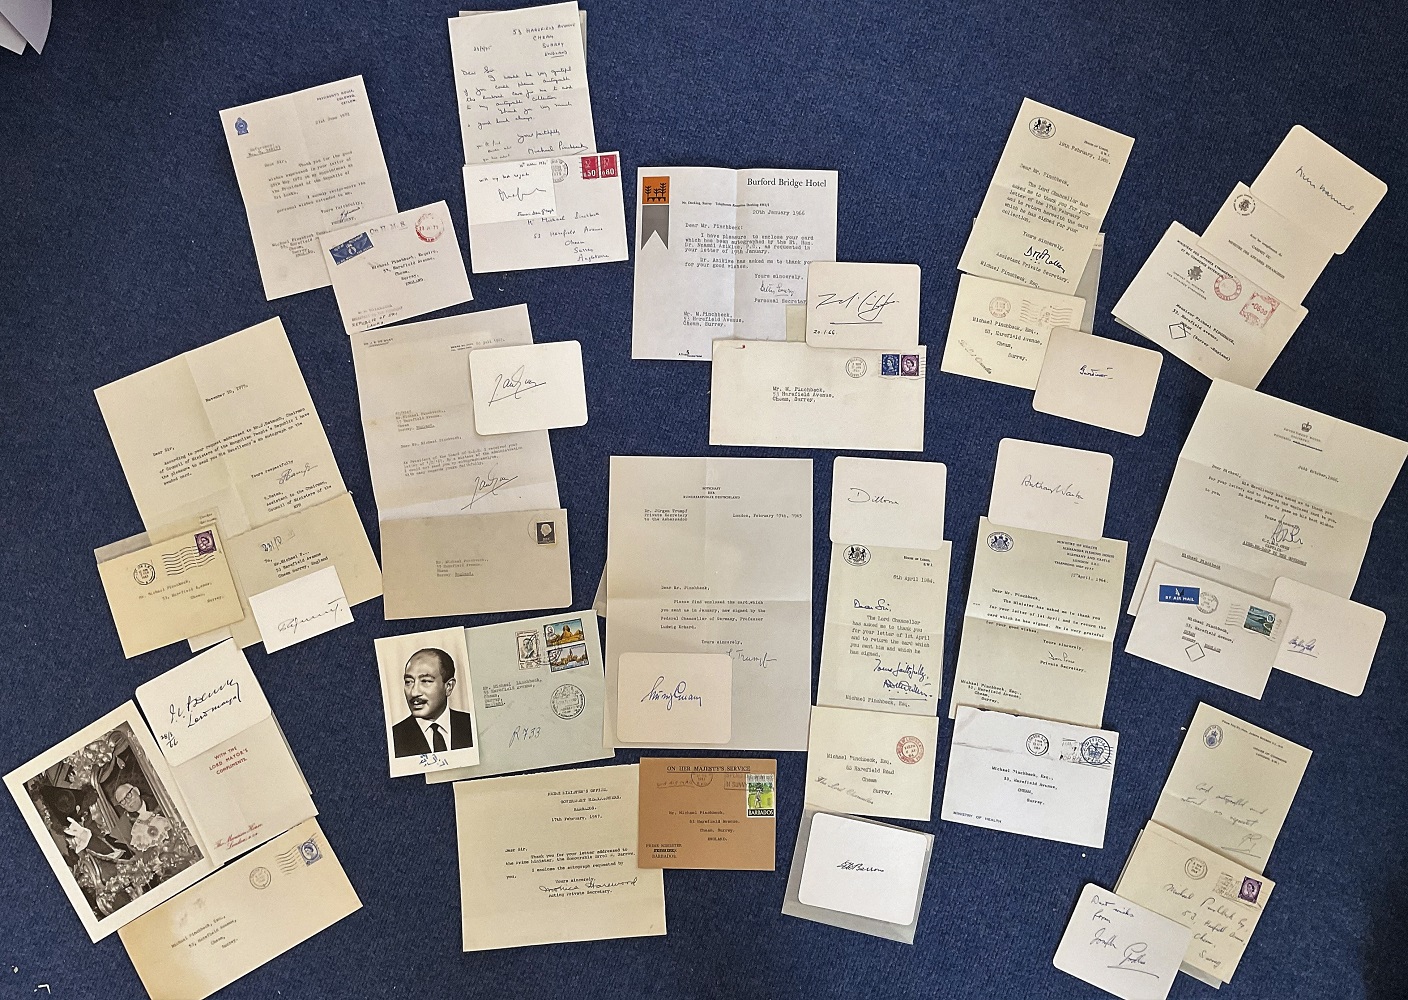 Politician signature collection of letters and cards some with original mailing envelopes.